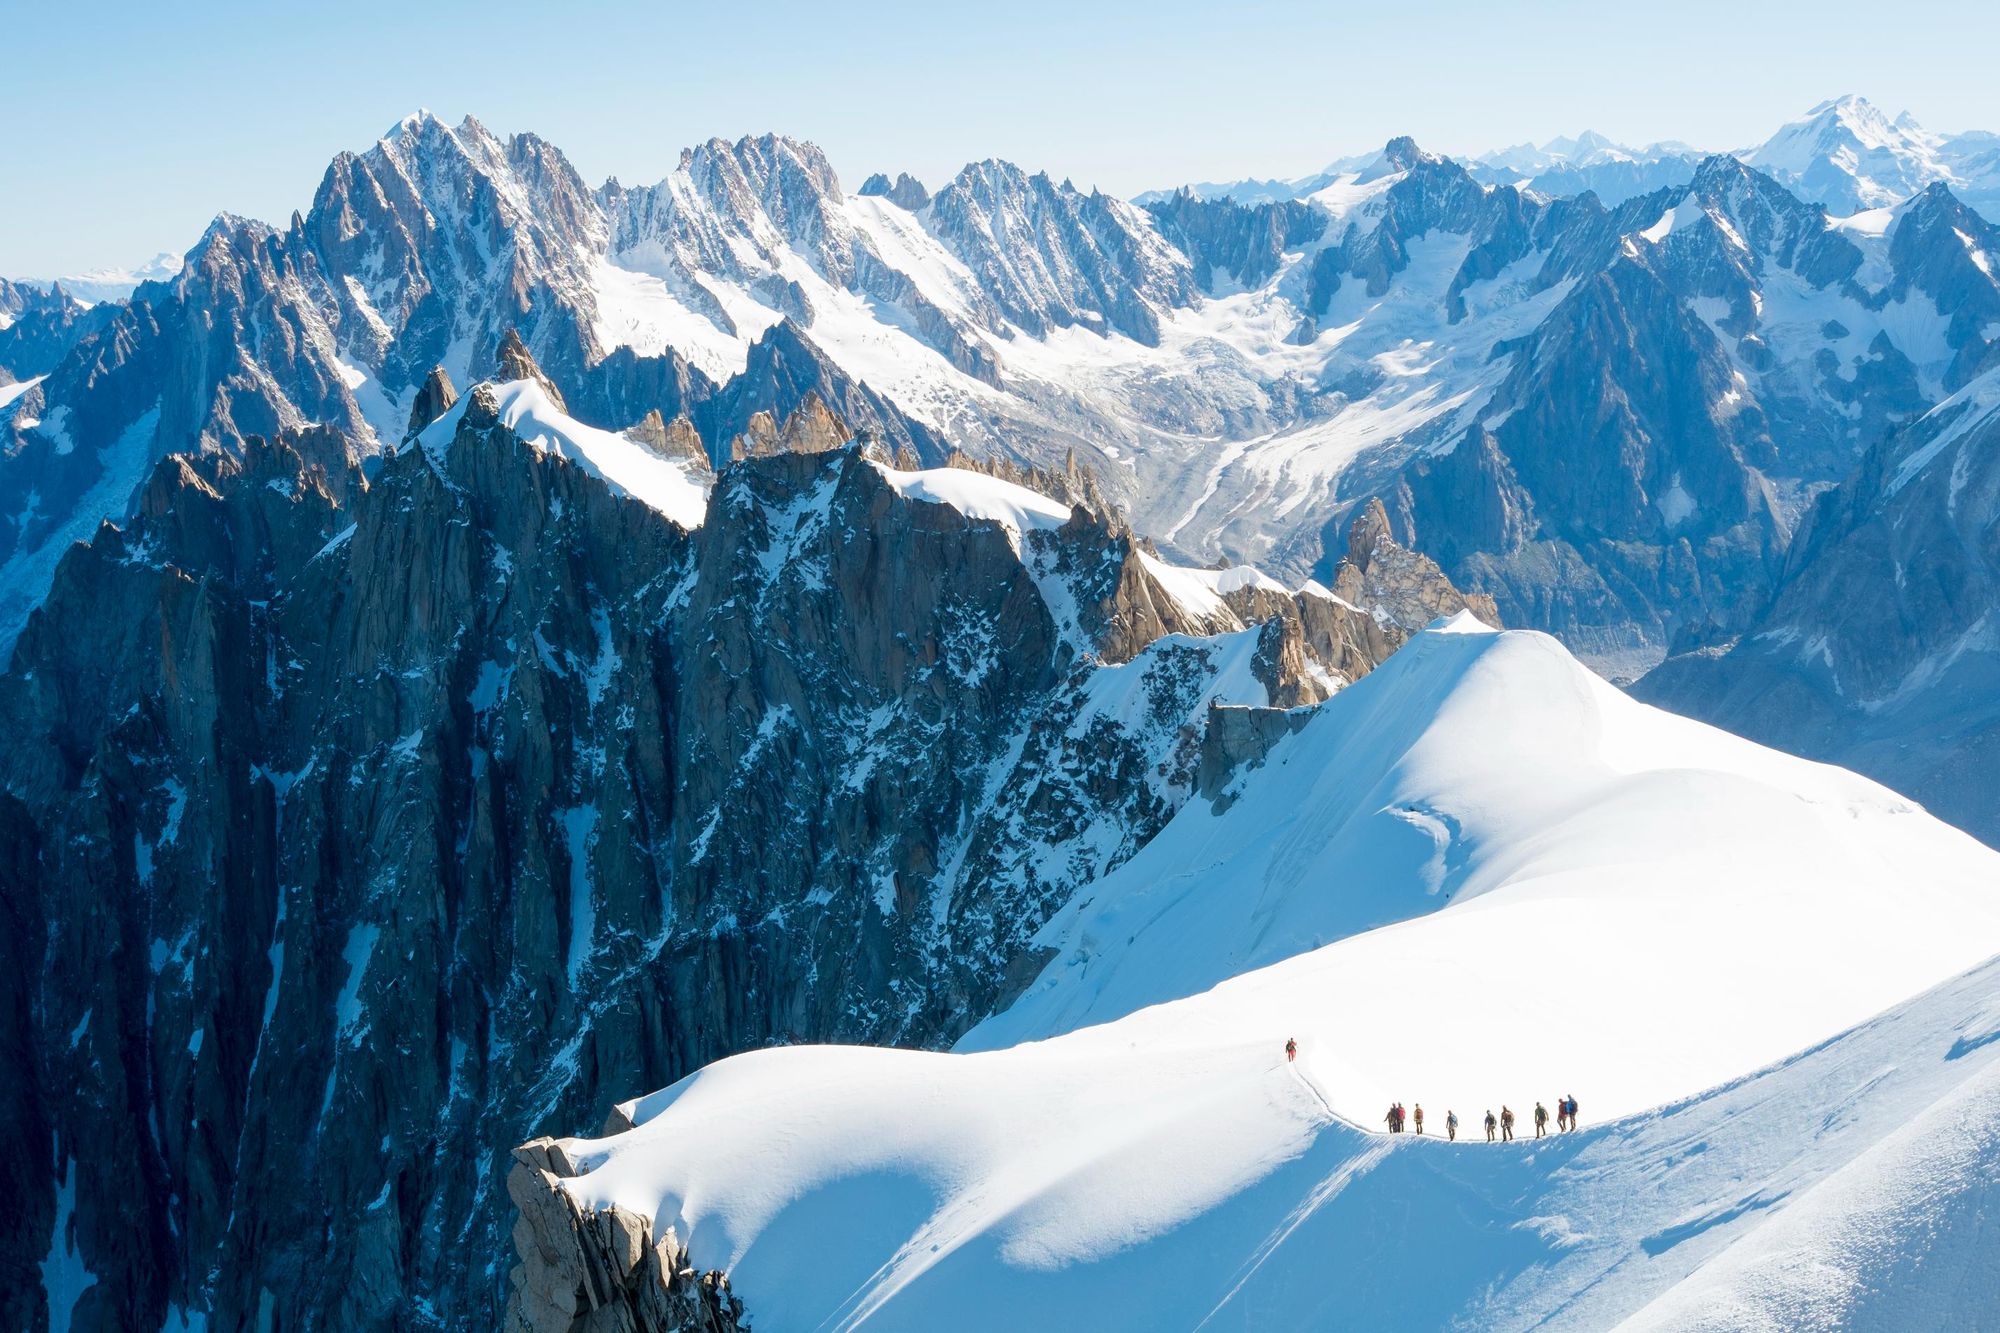 Climbers on the Mont Blanc Massif. Photo: Getty.